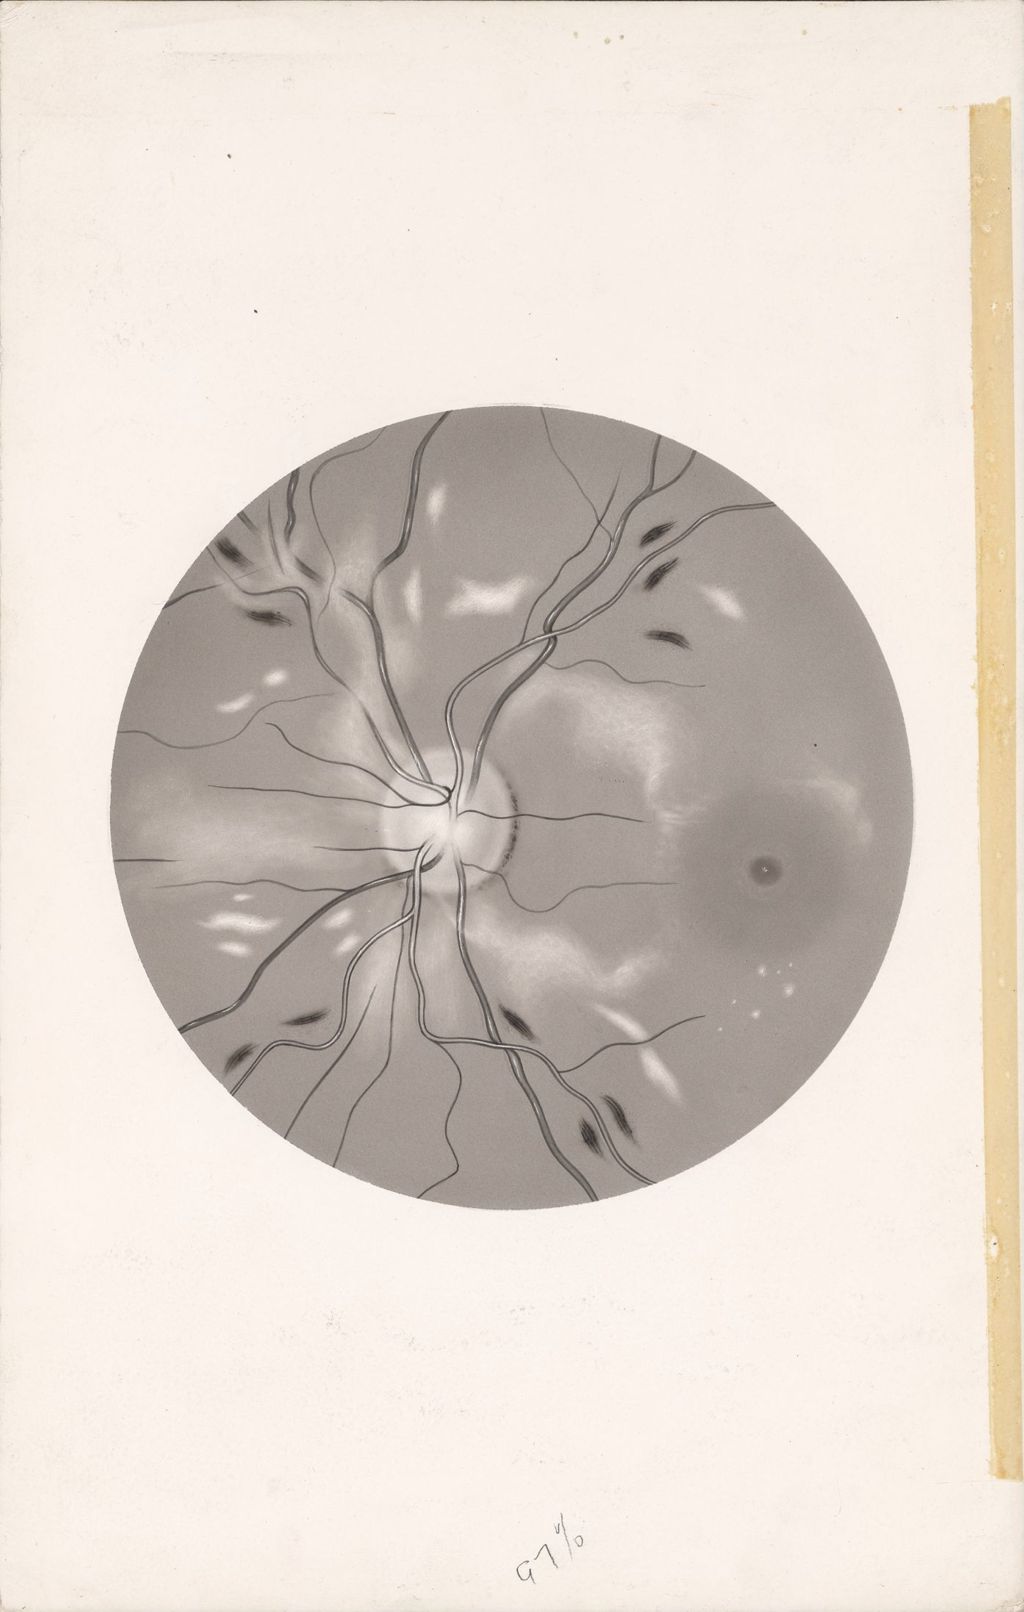 Miniature of Fundus in hypertensive retinopathy showing arteriovenous nicking, edema of retina, cotton wool spots, and retinal hemorrhages